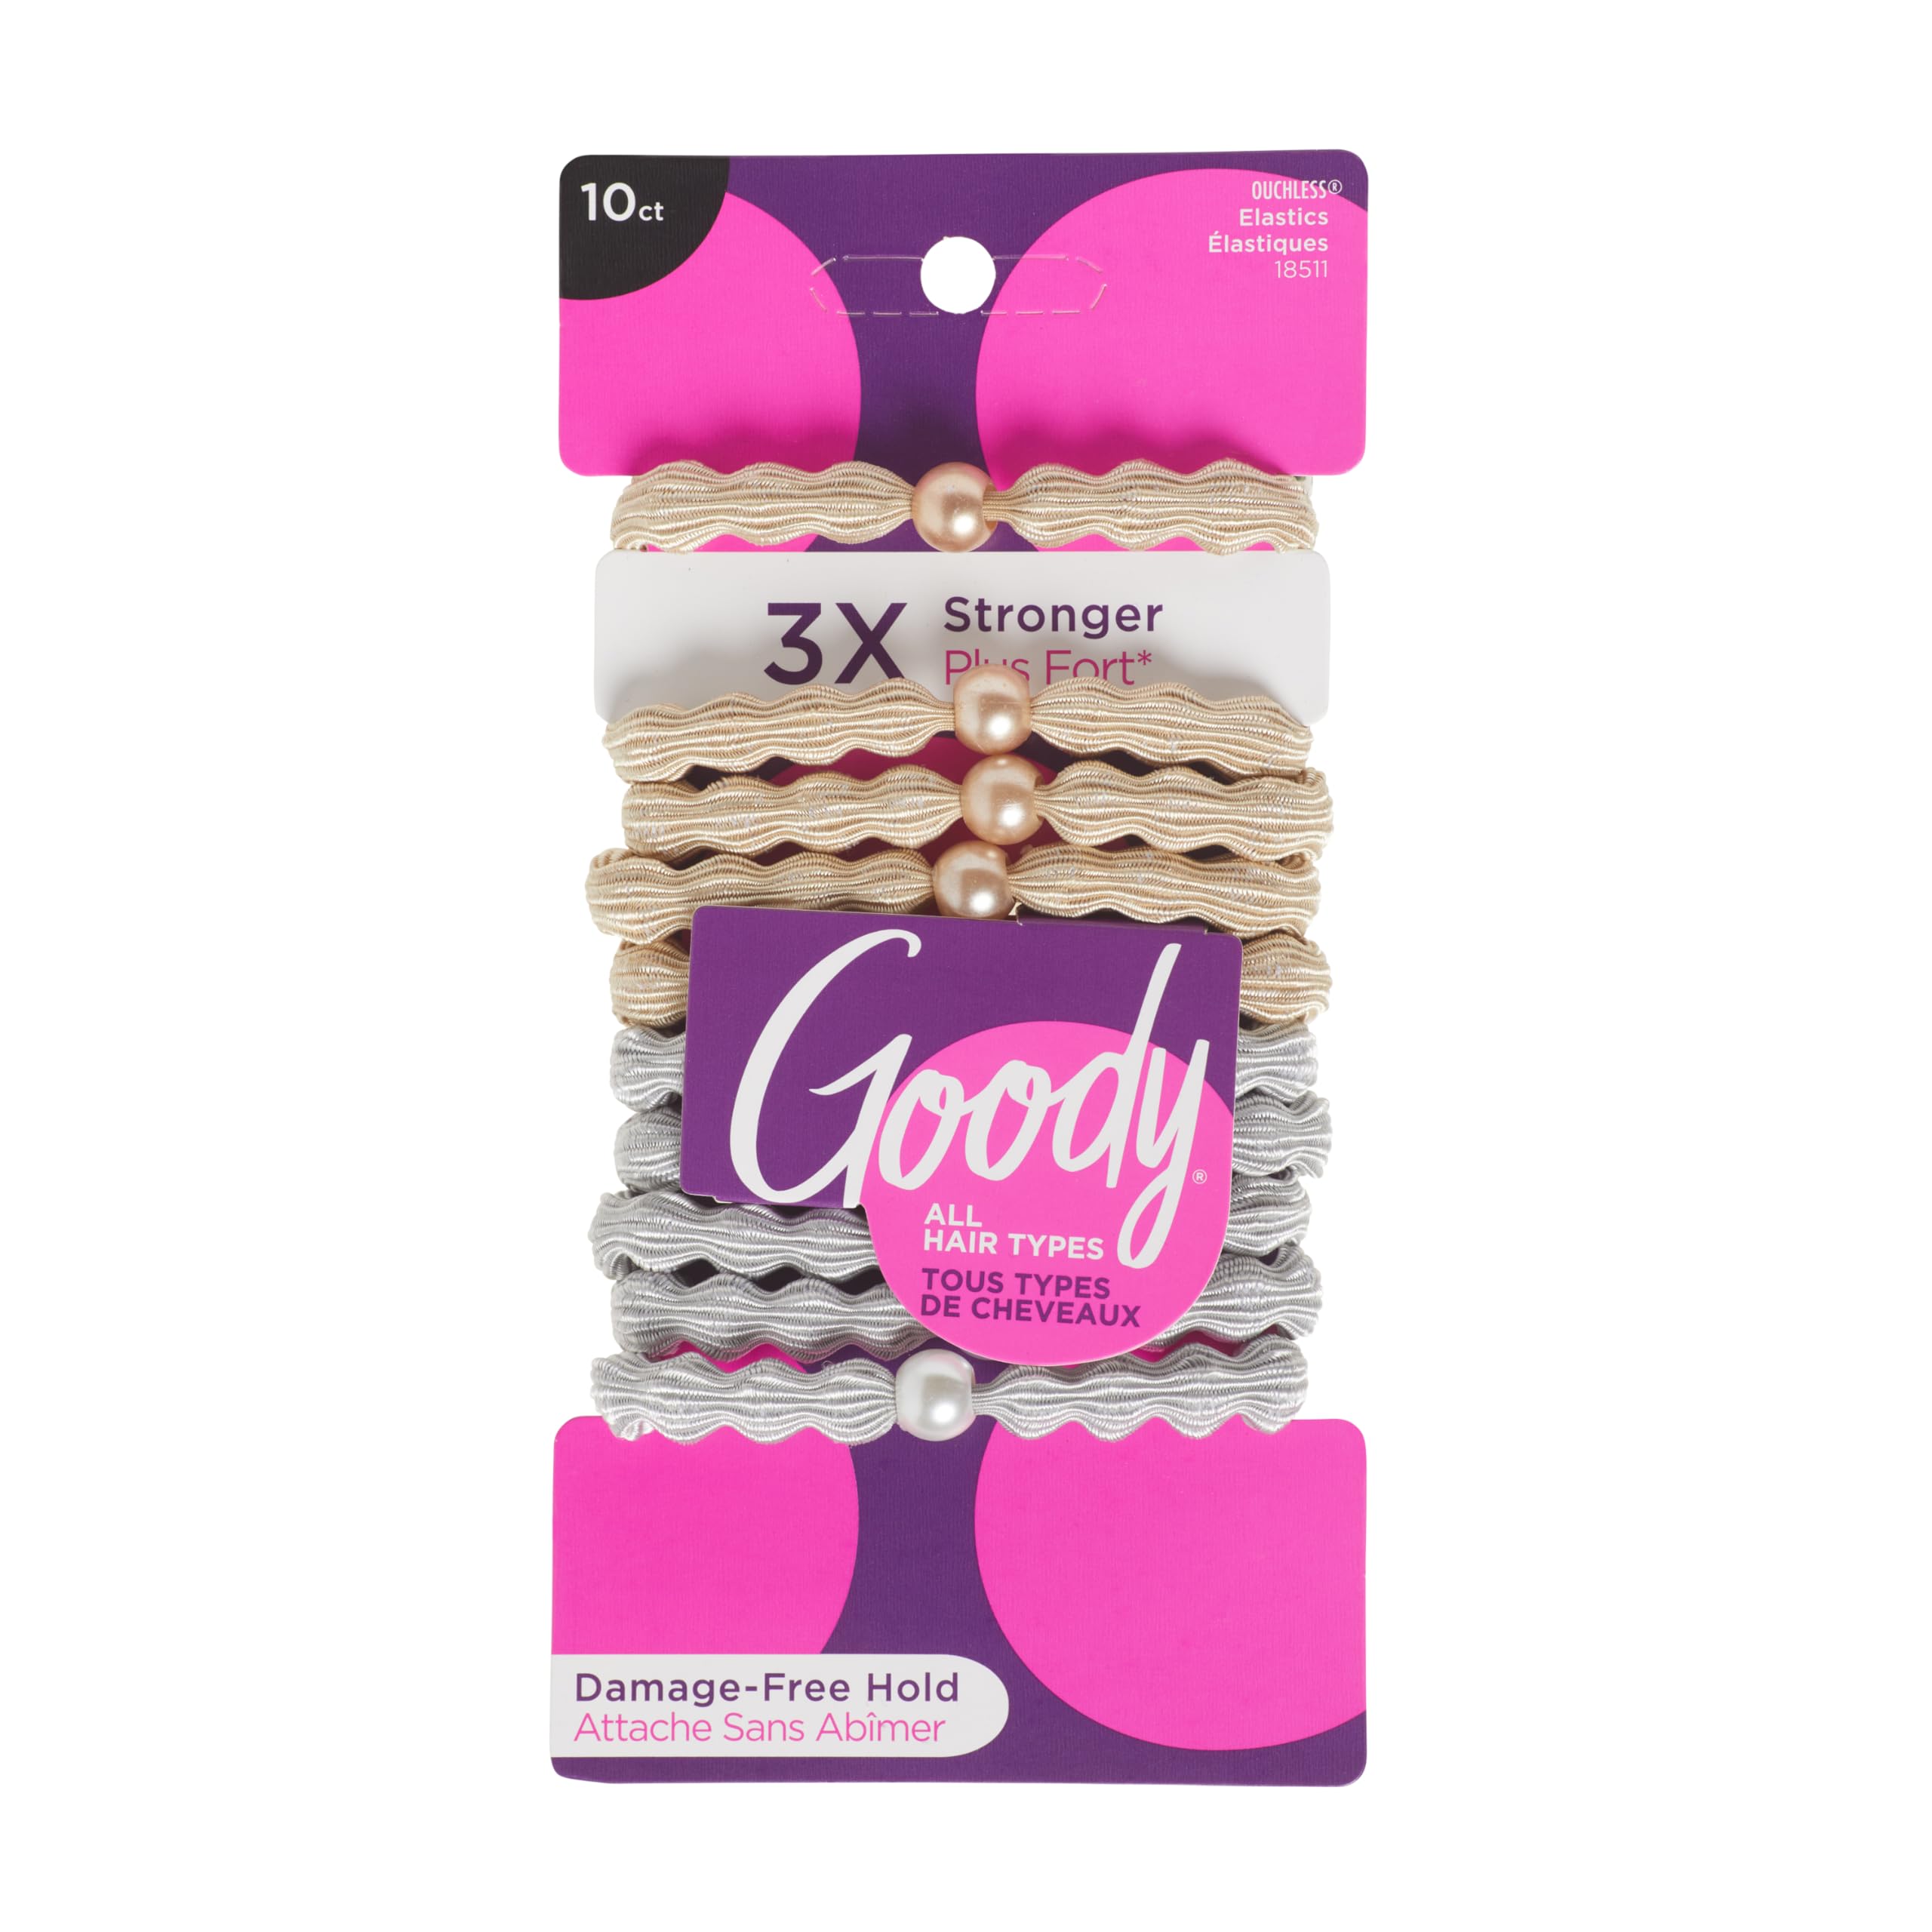 GOODY FOREVER ELASTICS 6MM 10CT BLONDE SILVER